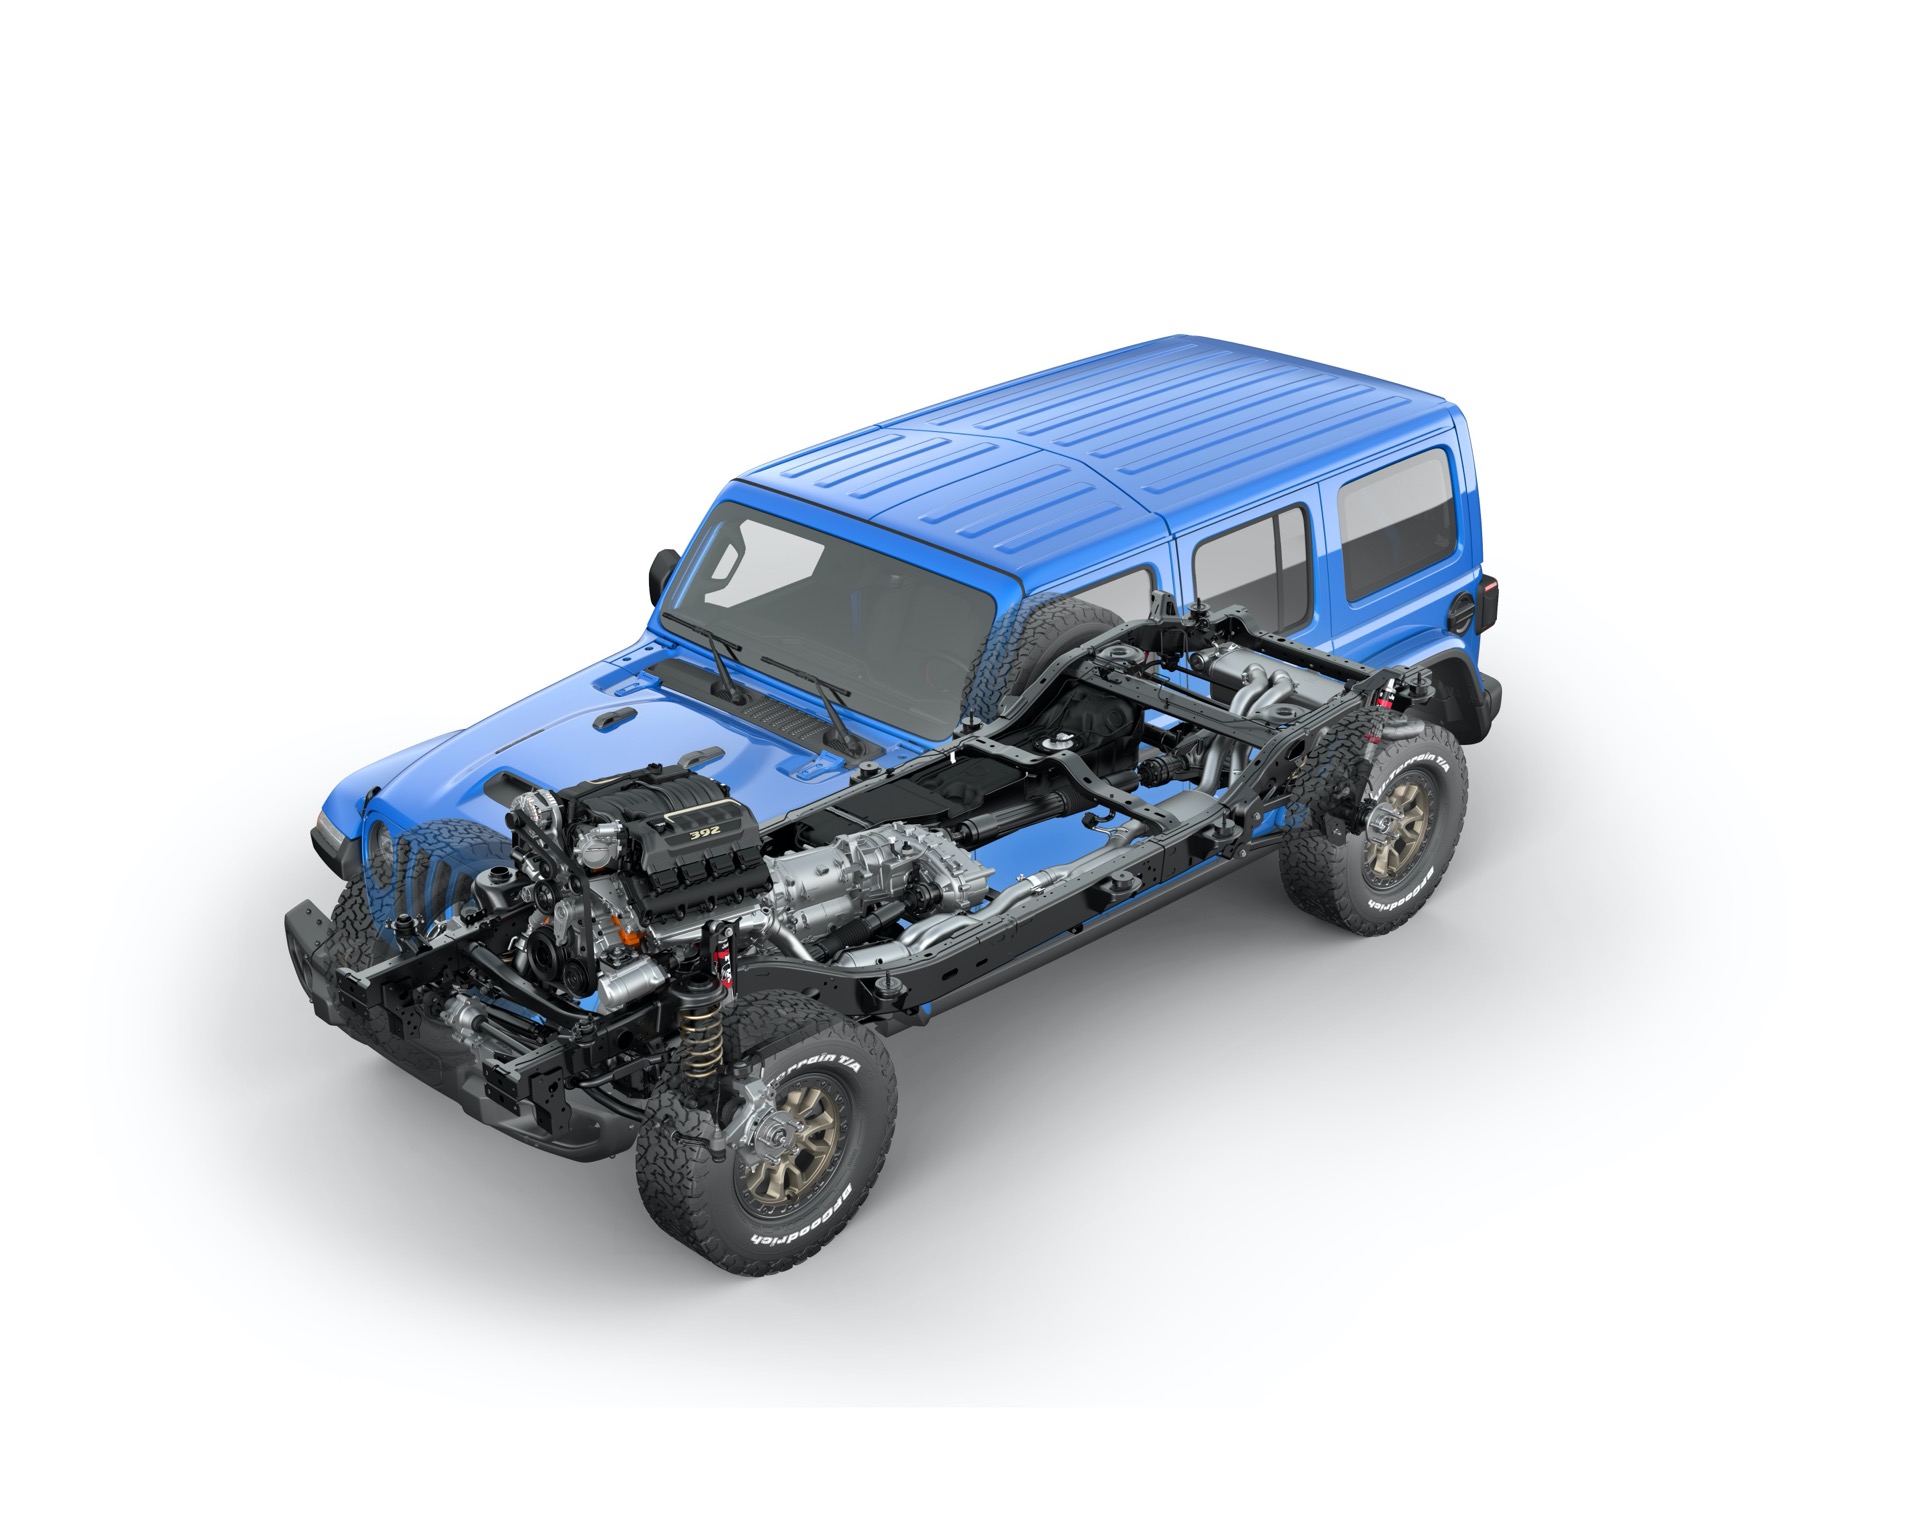 2021 Jeep Wrangler Rubicon 392 Ghosted Chassis